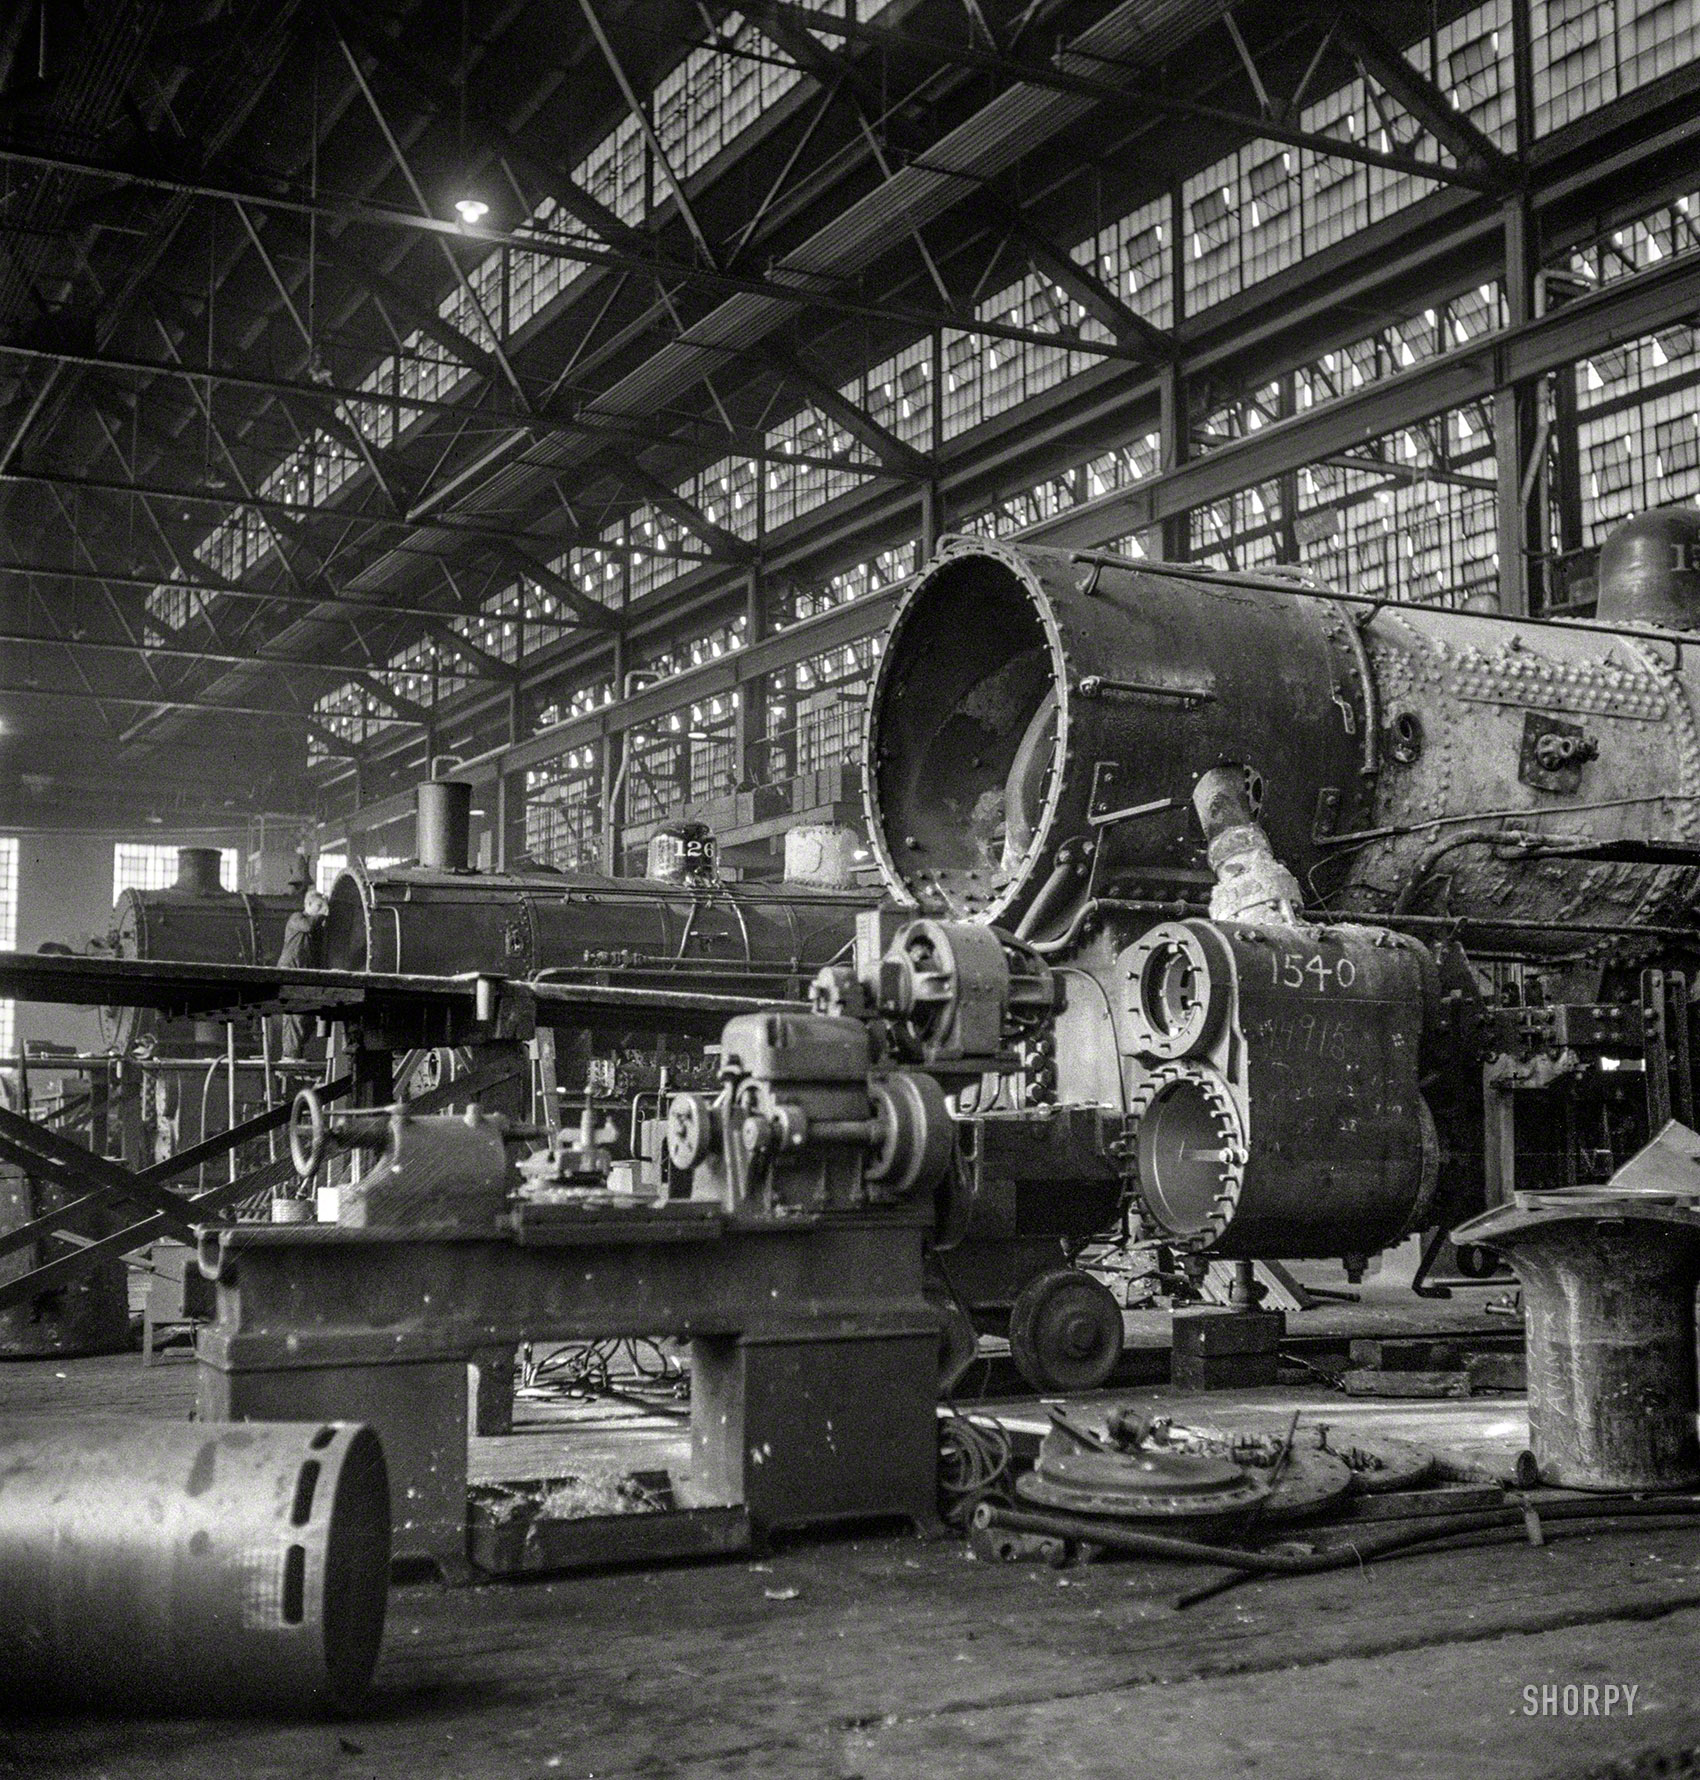 December 1942. "Chicago, Illinois. In the Chicago & North Western locomotive repair shops." Photo by Jack Delano, Office of War Information. View full size.